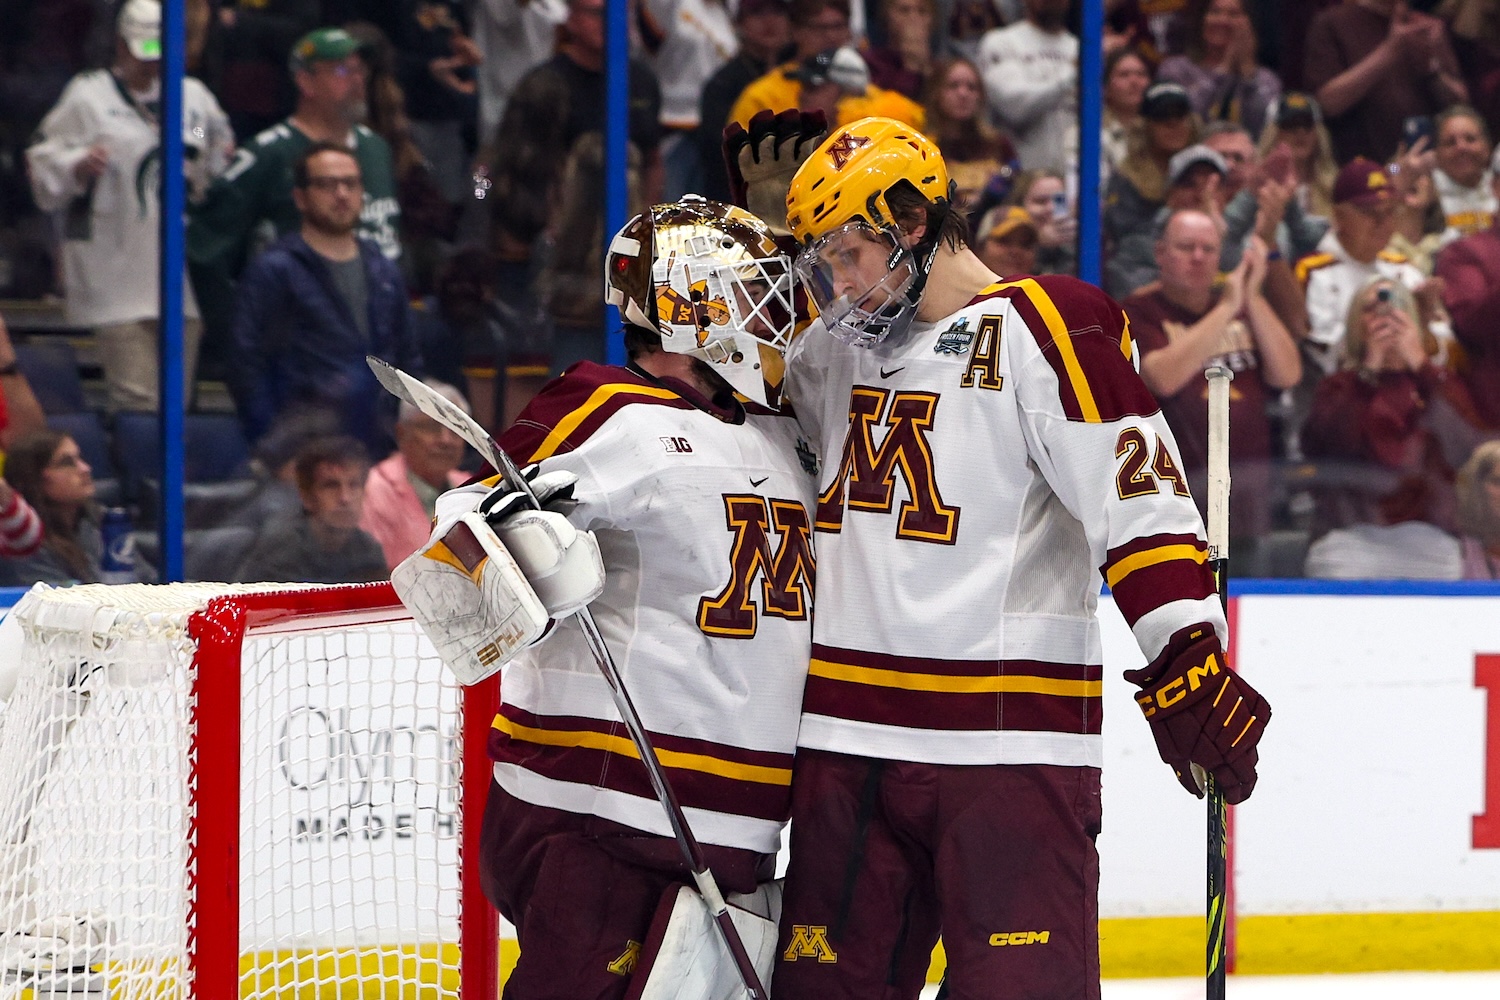 Apr 6, 2023; Tampa, Florida, USA; Minnesota forward Jaxon Nelson (24) congratulates goaltender Justen Close (1) after beating Boston University in the semifinals of the 2023 Frozen Four college ice hockey tournament at Amalie Arena. Mandatory Credit: Nathan Ray Seebeck-USA TODAY Sports